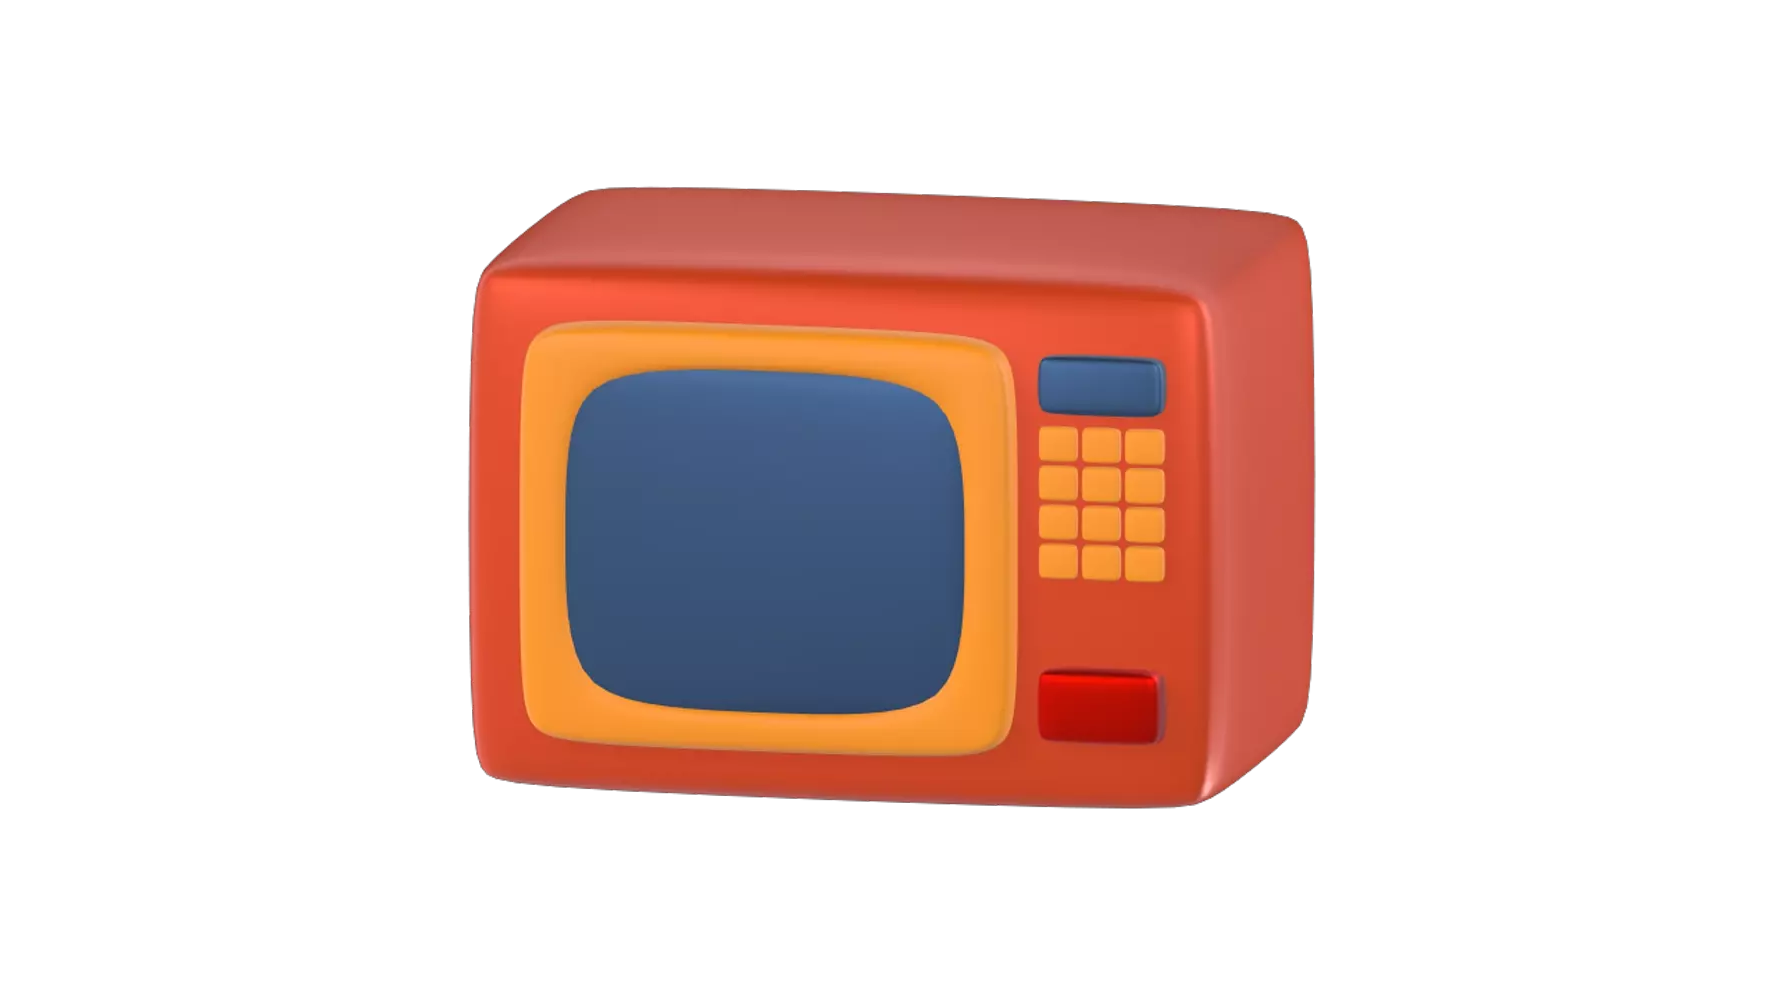 Microwave 3D Graphic